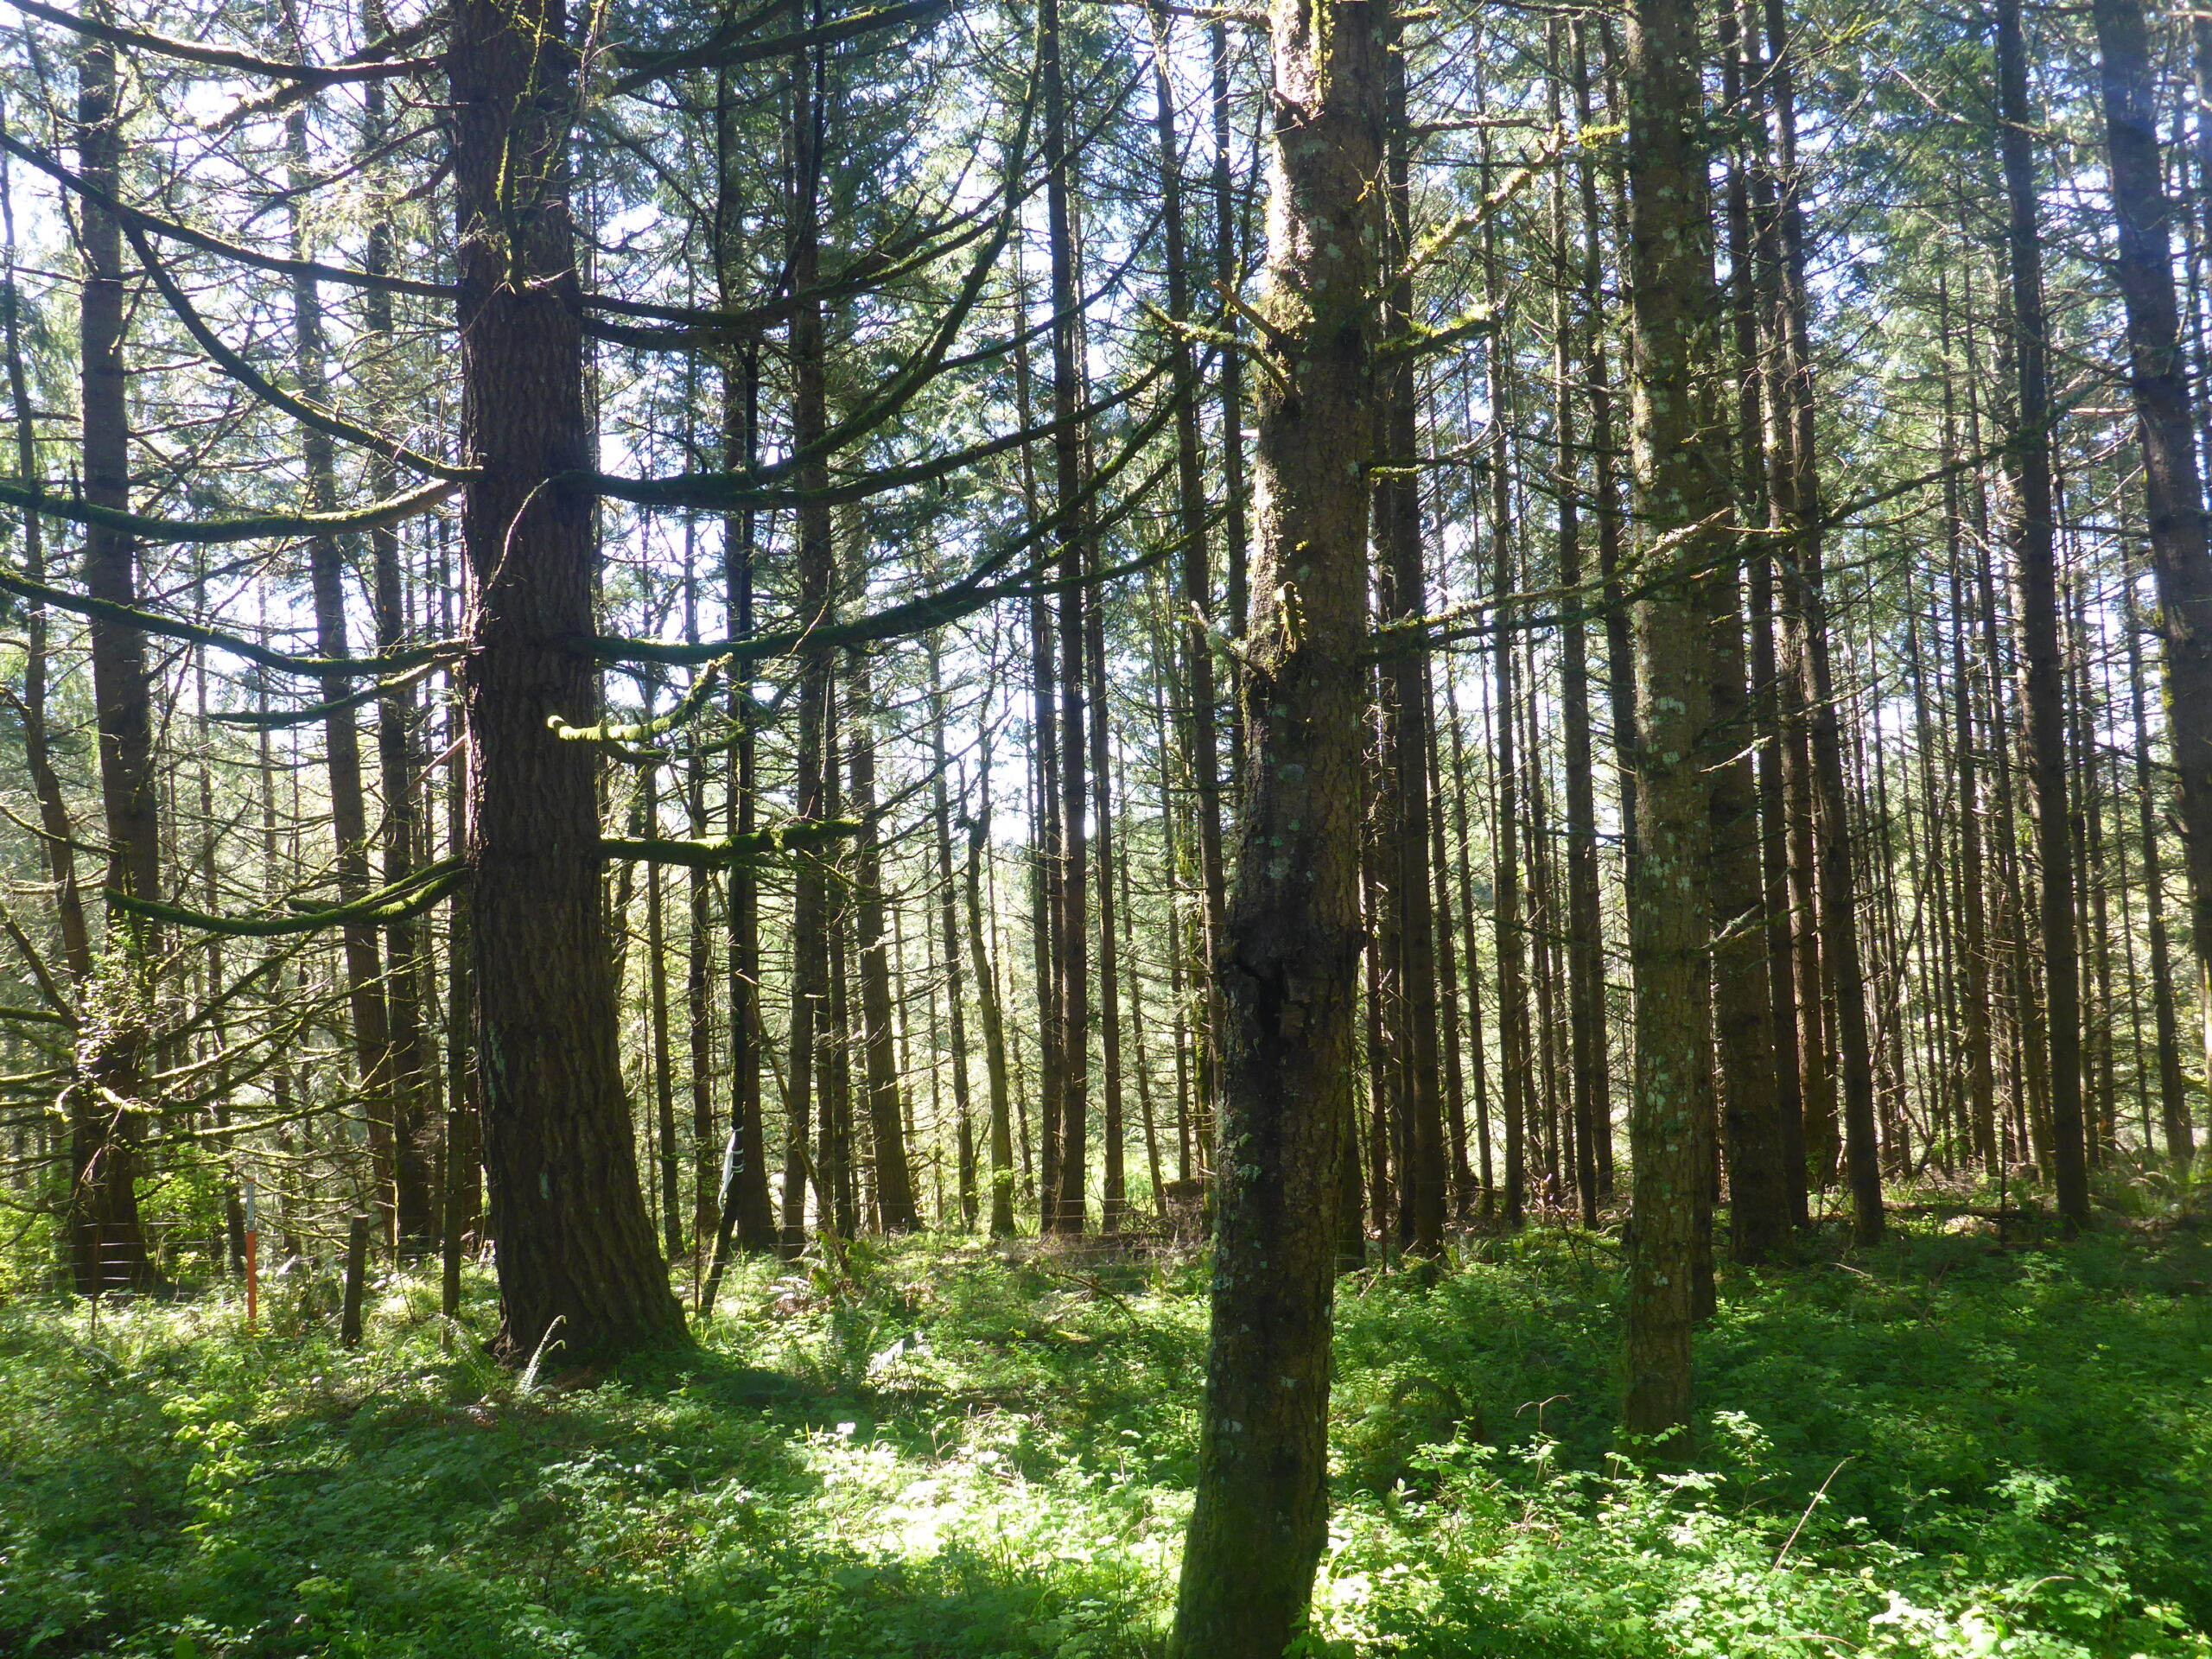 This is a picture of a coniferous section of the forest. There are many trees amongst a short green understory and the trees look like they don't have many needles on their lower branches. There are two larger trees in the forefront of the photo and many thinner trees in the background.